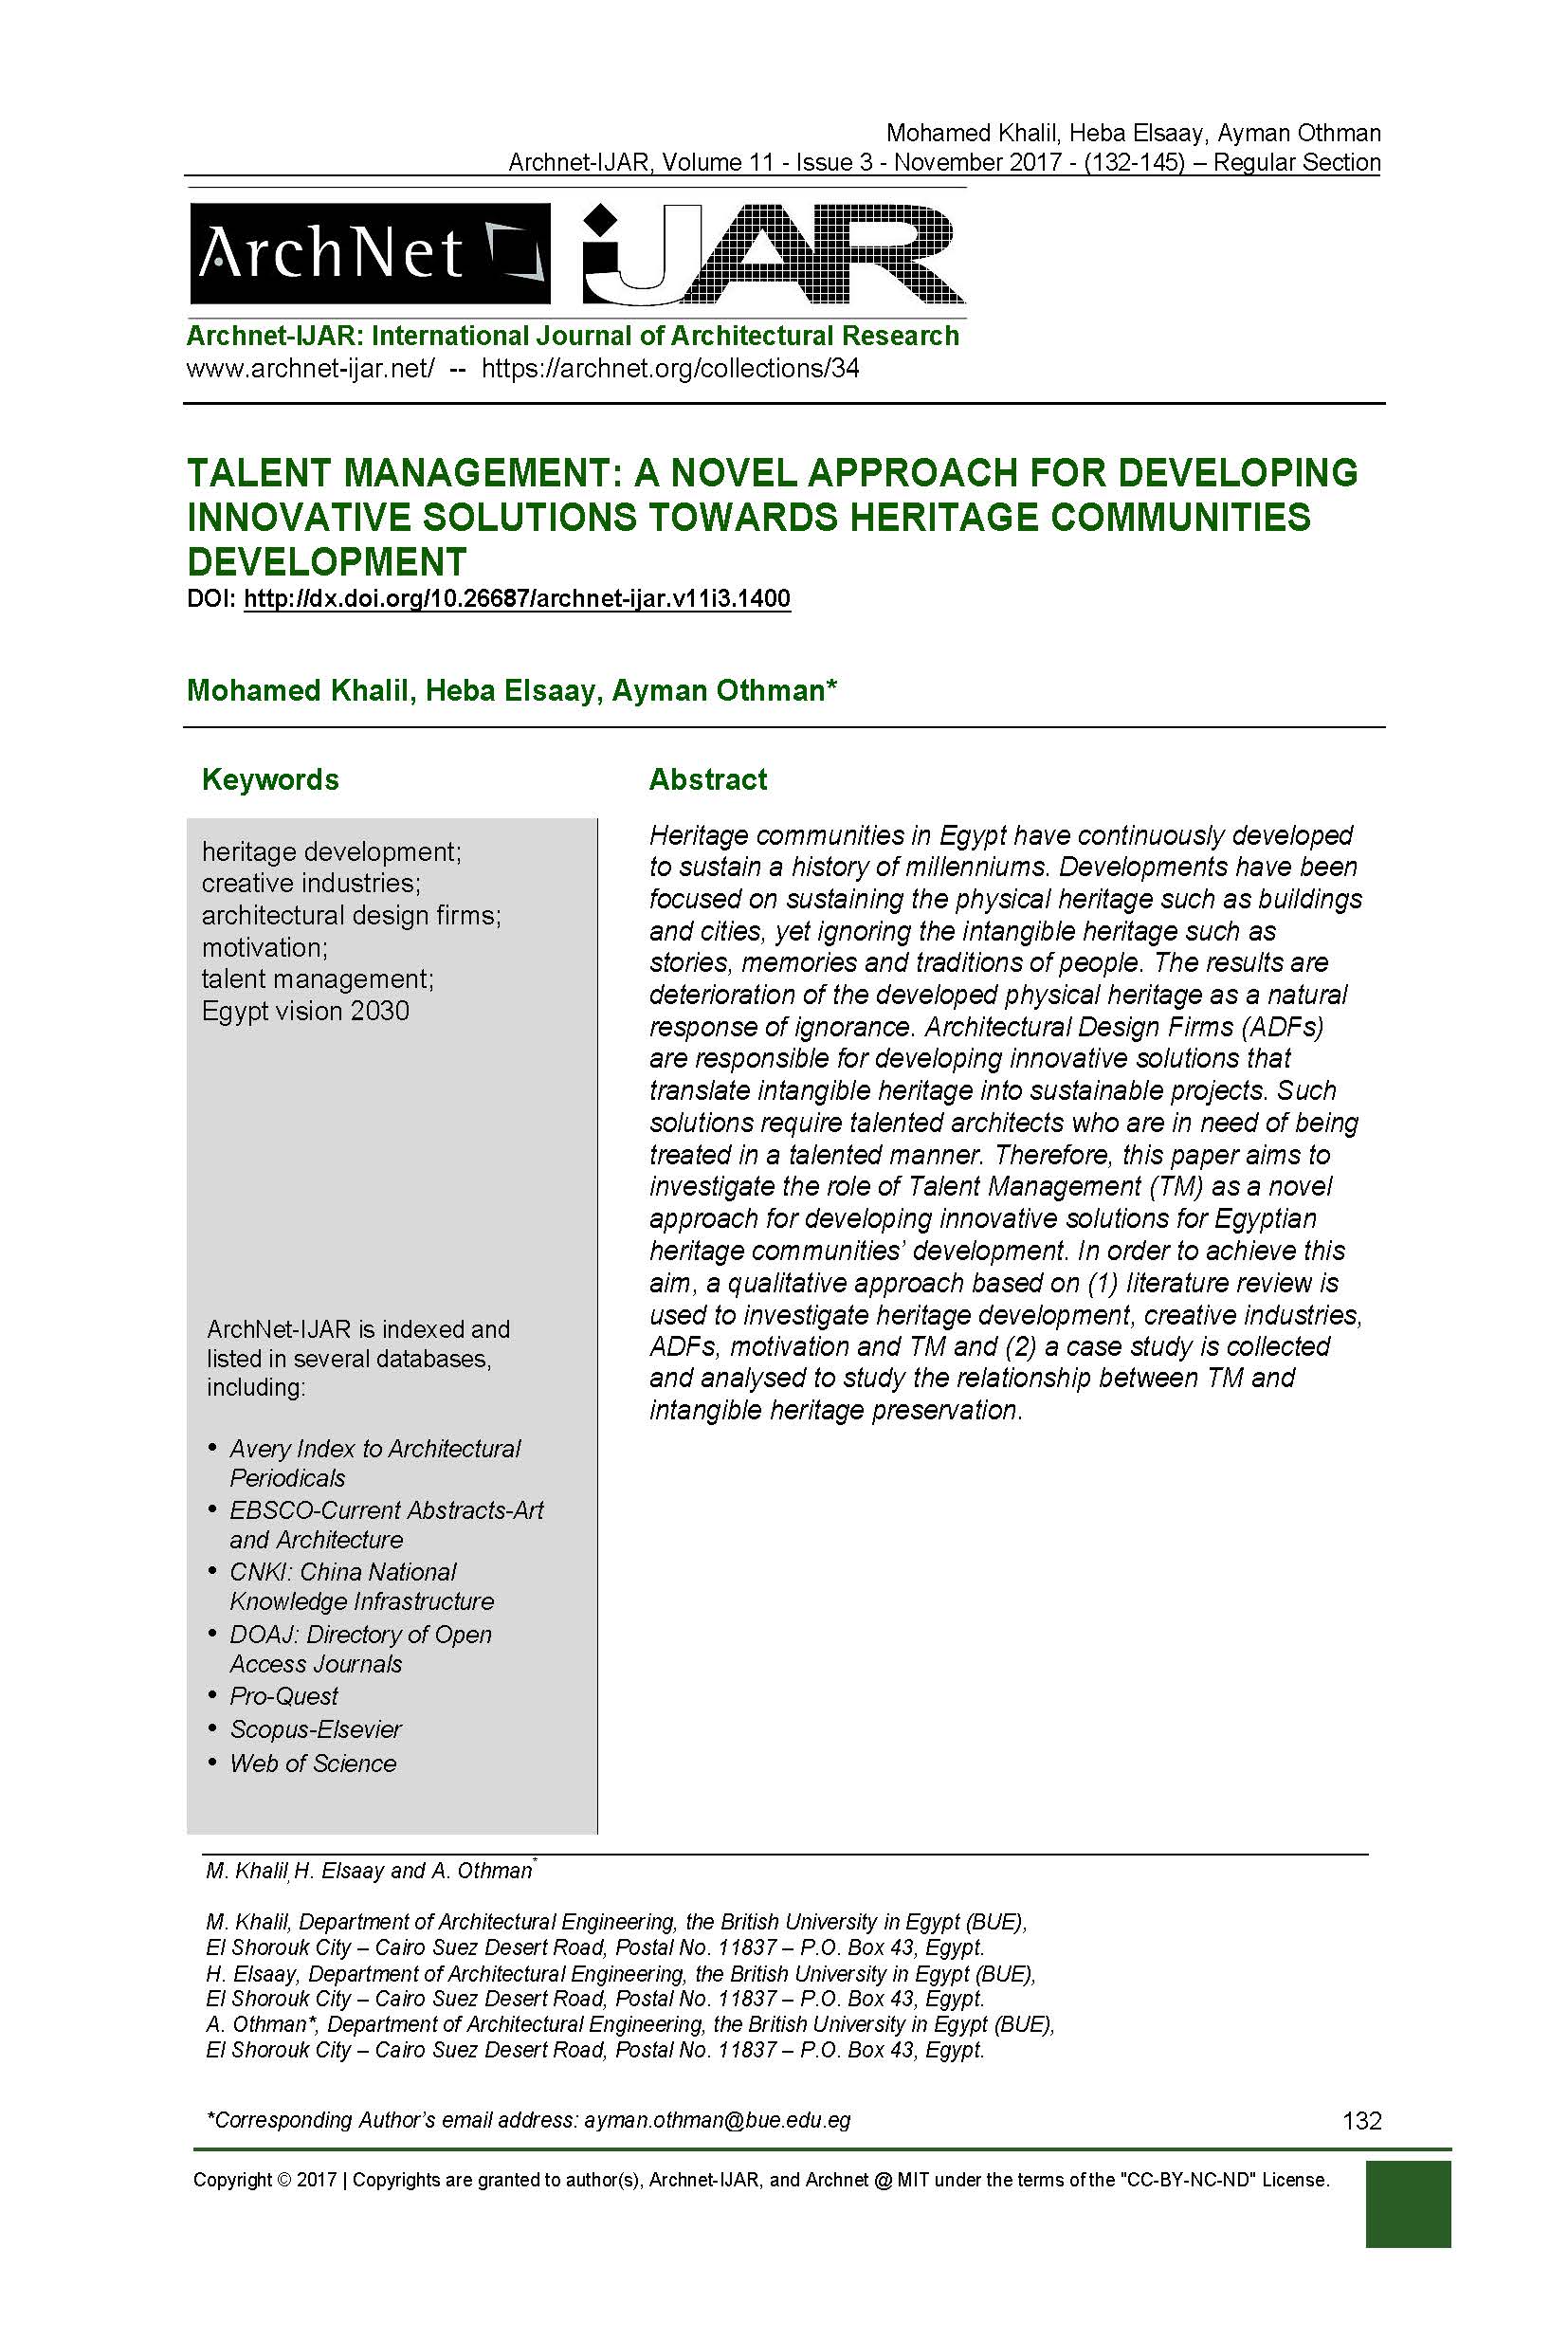 Talent Management: A Novel Approach for Developing Innovative Solutions Towards Heritage Communities Development